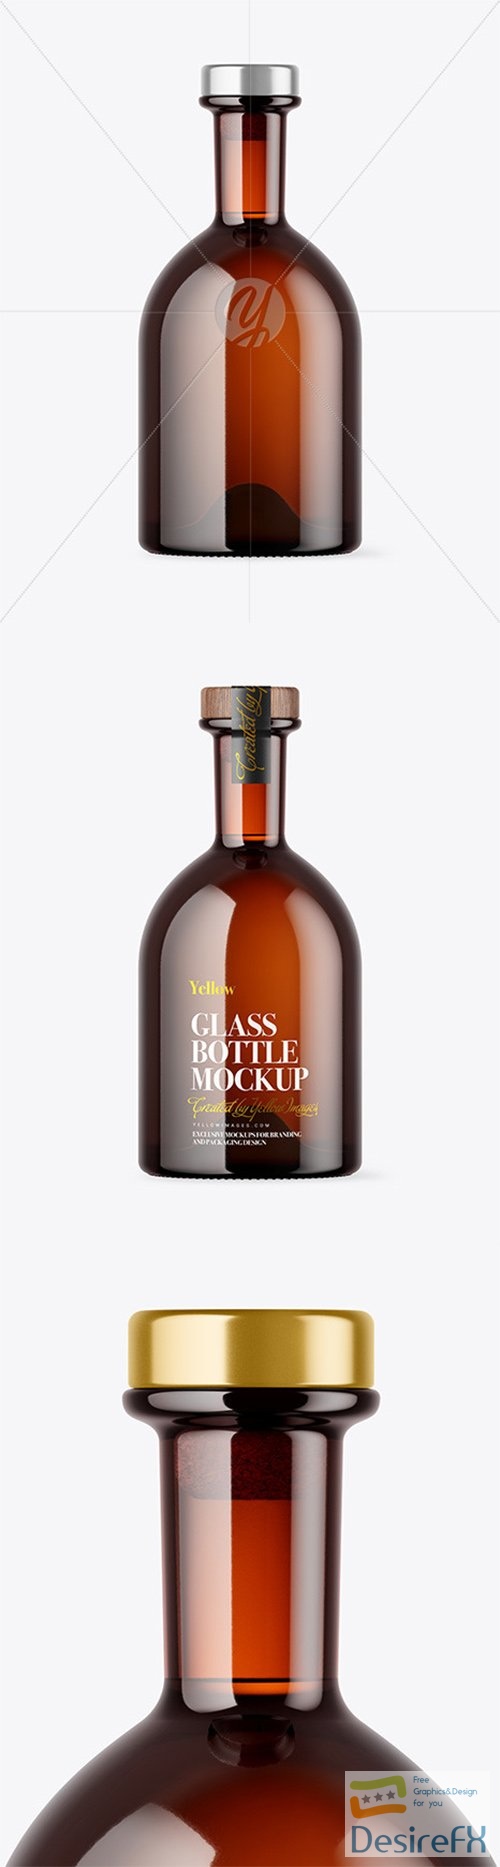 Amber Glass Bottle with Wooden Cap Mockup 79664 TIF